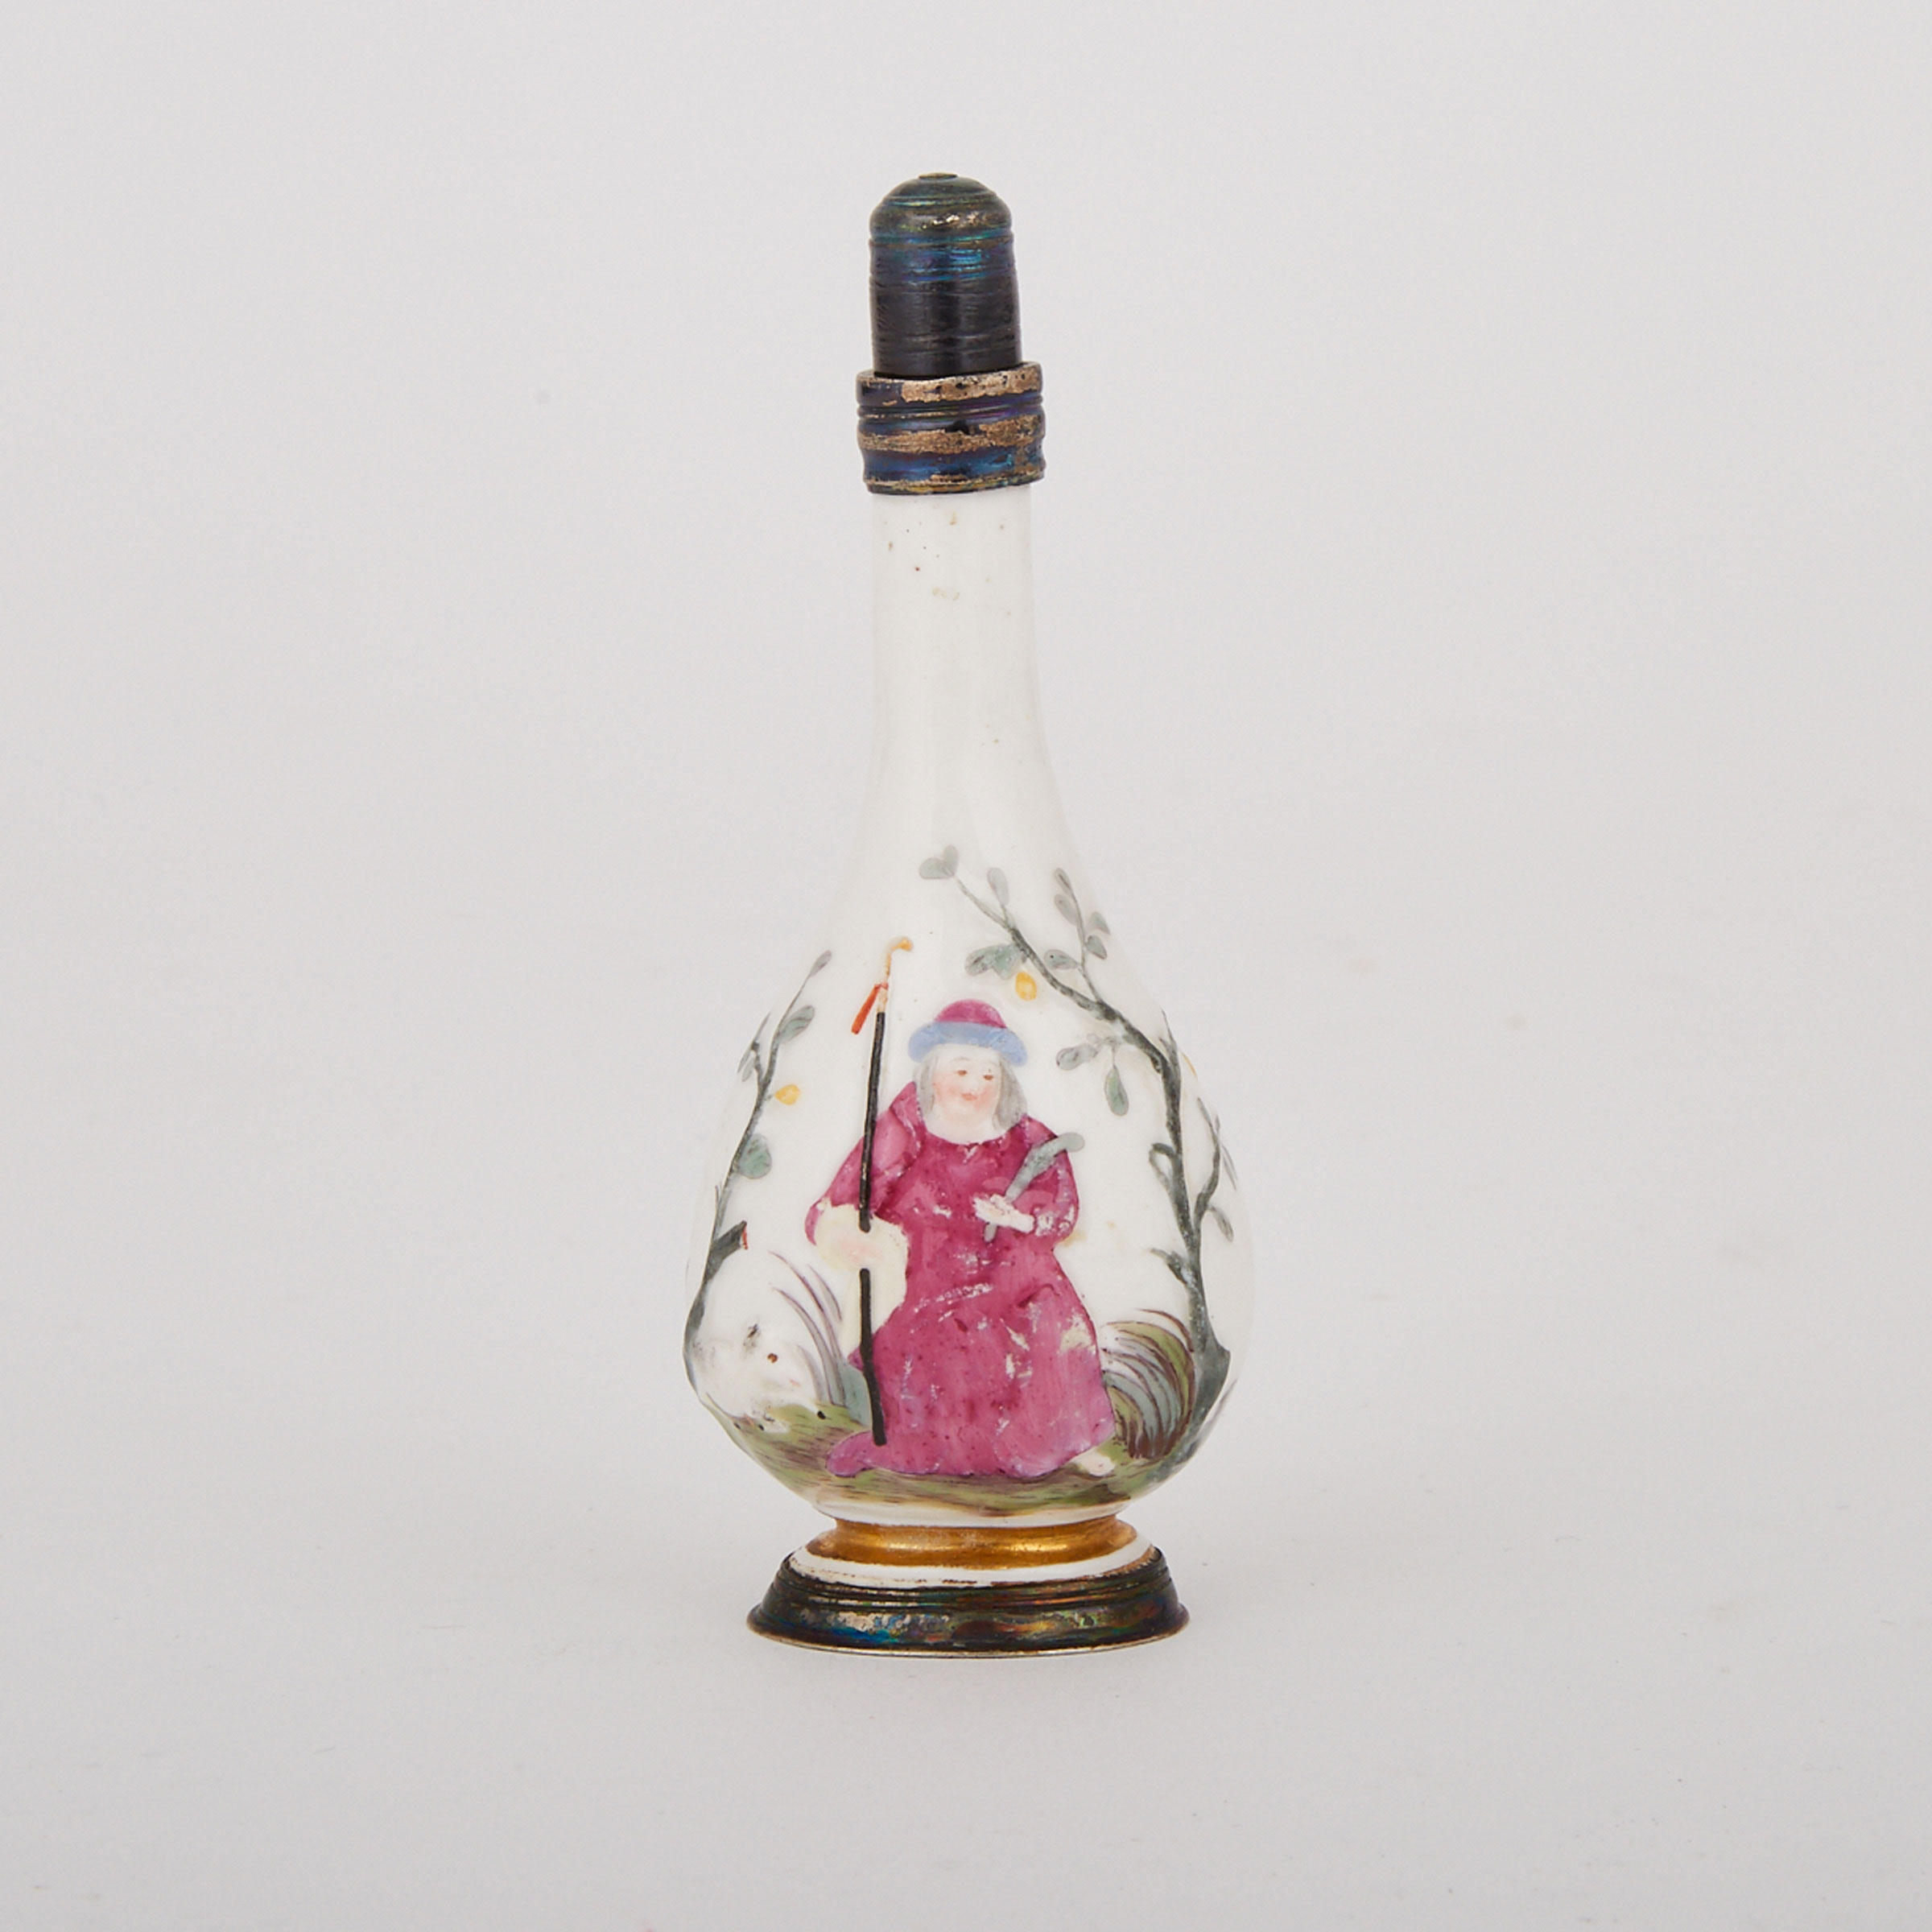 Continental Porcelain Scent Bottle, probably German, 18th century